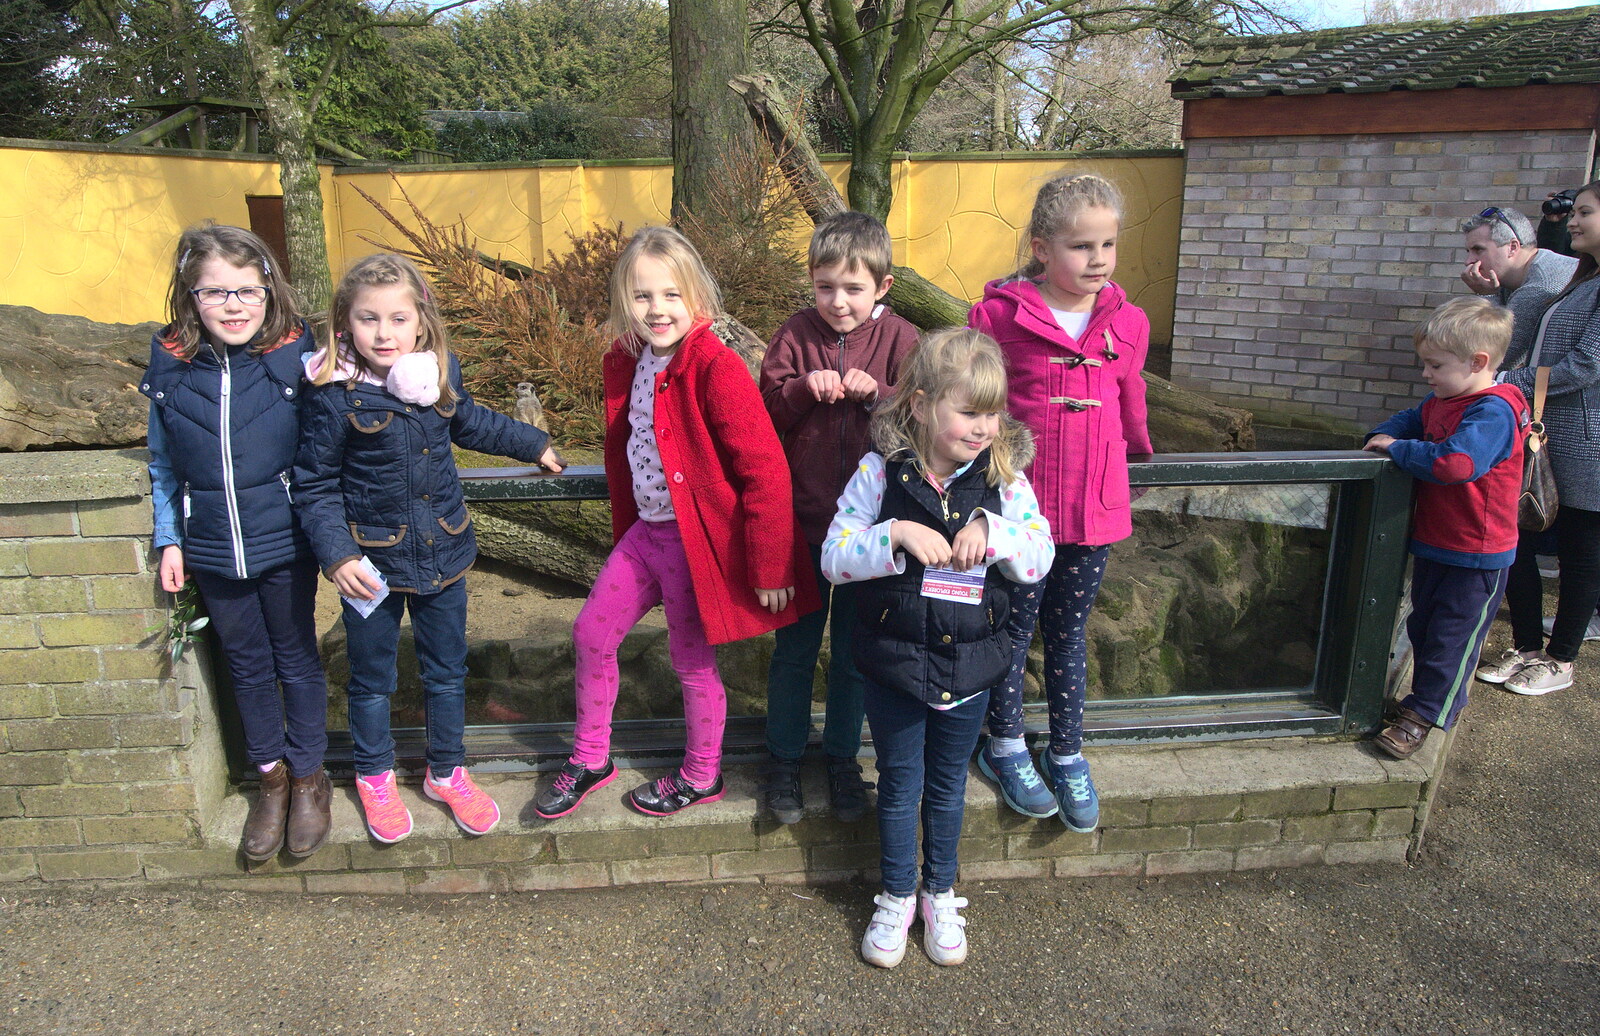 Everyone pretends to be a meerkat from Another Trip to Banham Zoo, Banham, Norfolk - 25th March 2016